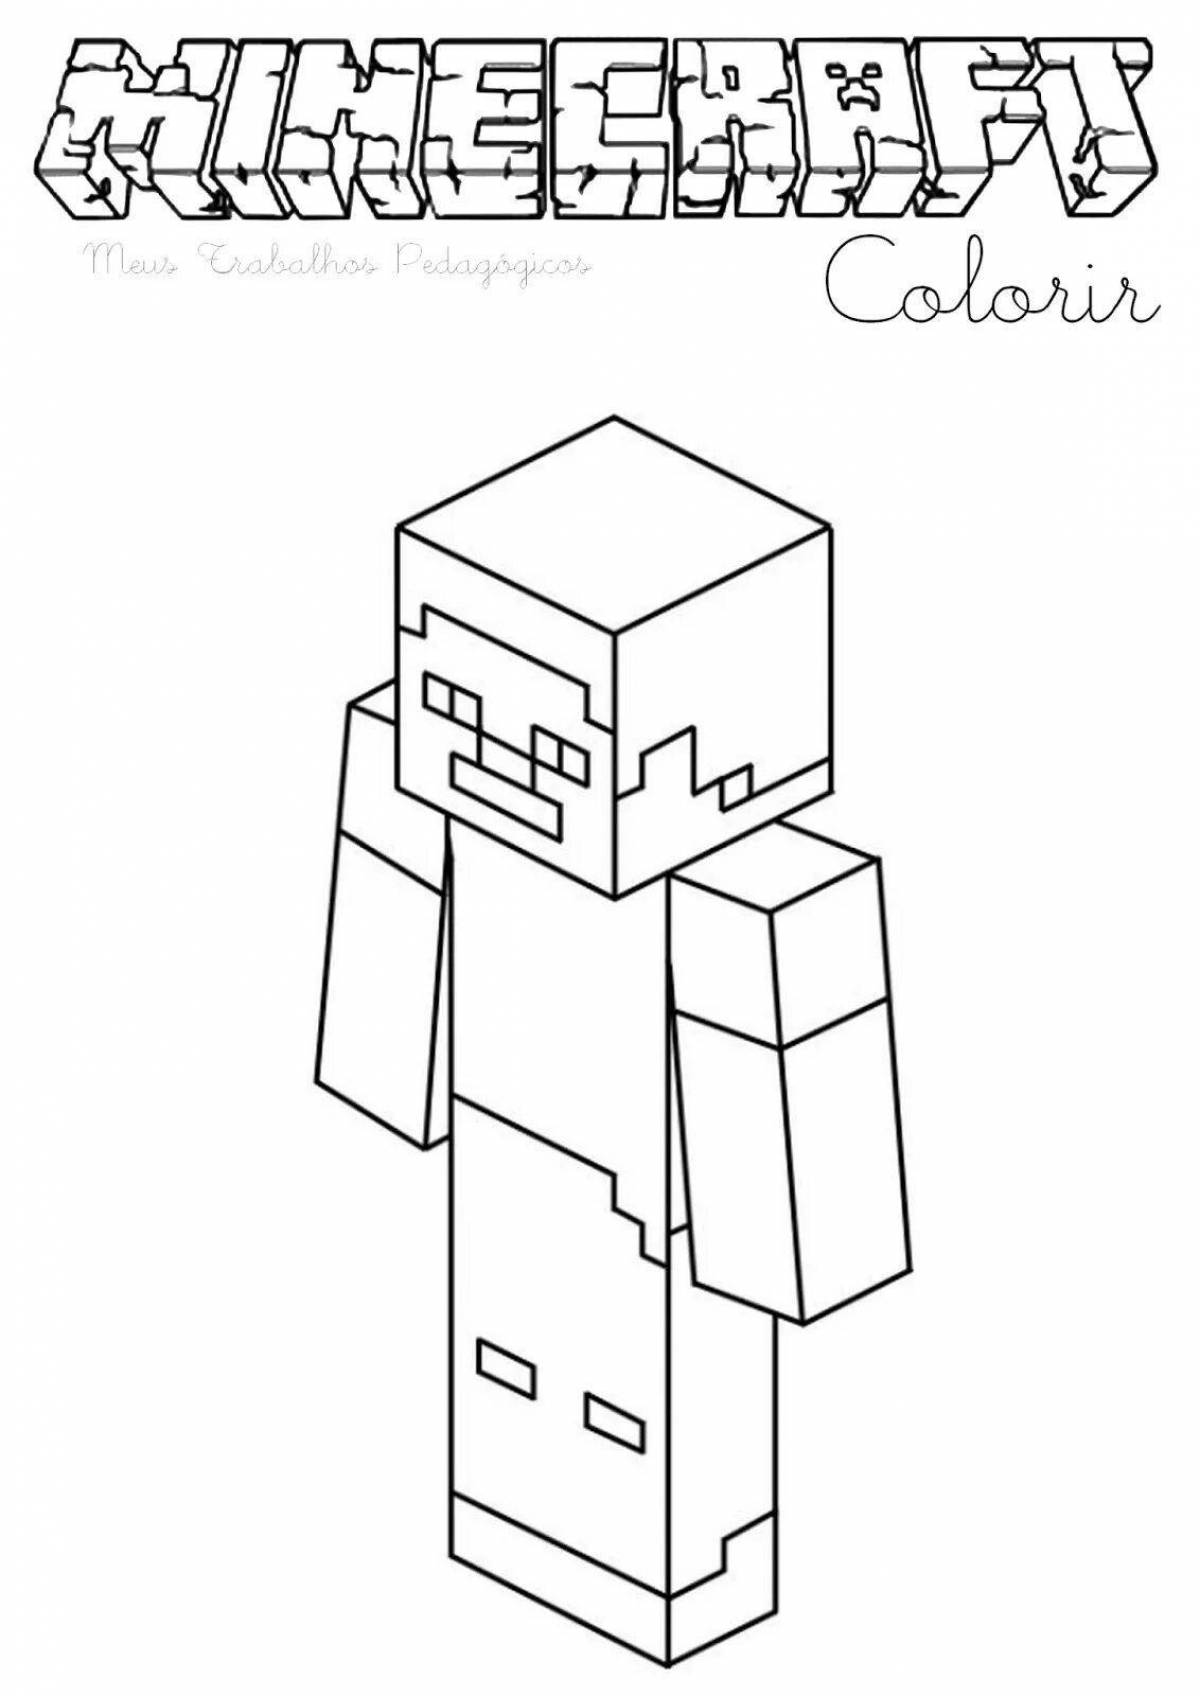 Awesome minecraft visor coloring page